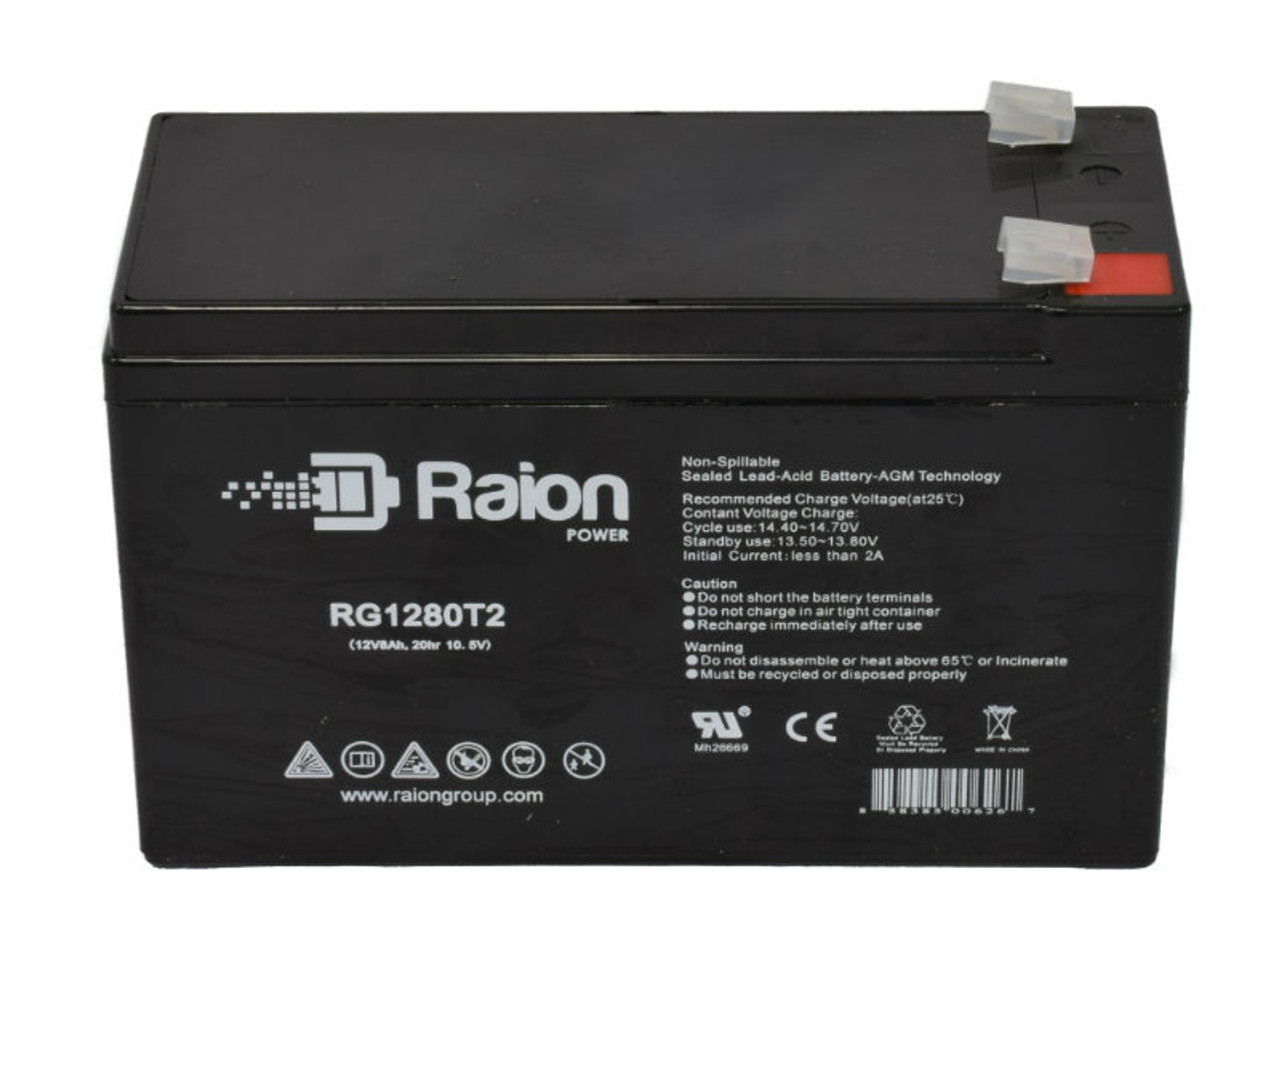 Raion Power Replacement 12V 8Ah Battery for Hoffman Laroche Micromonitor 7143 Ecg Mon - 1 Pack